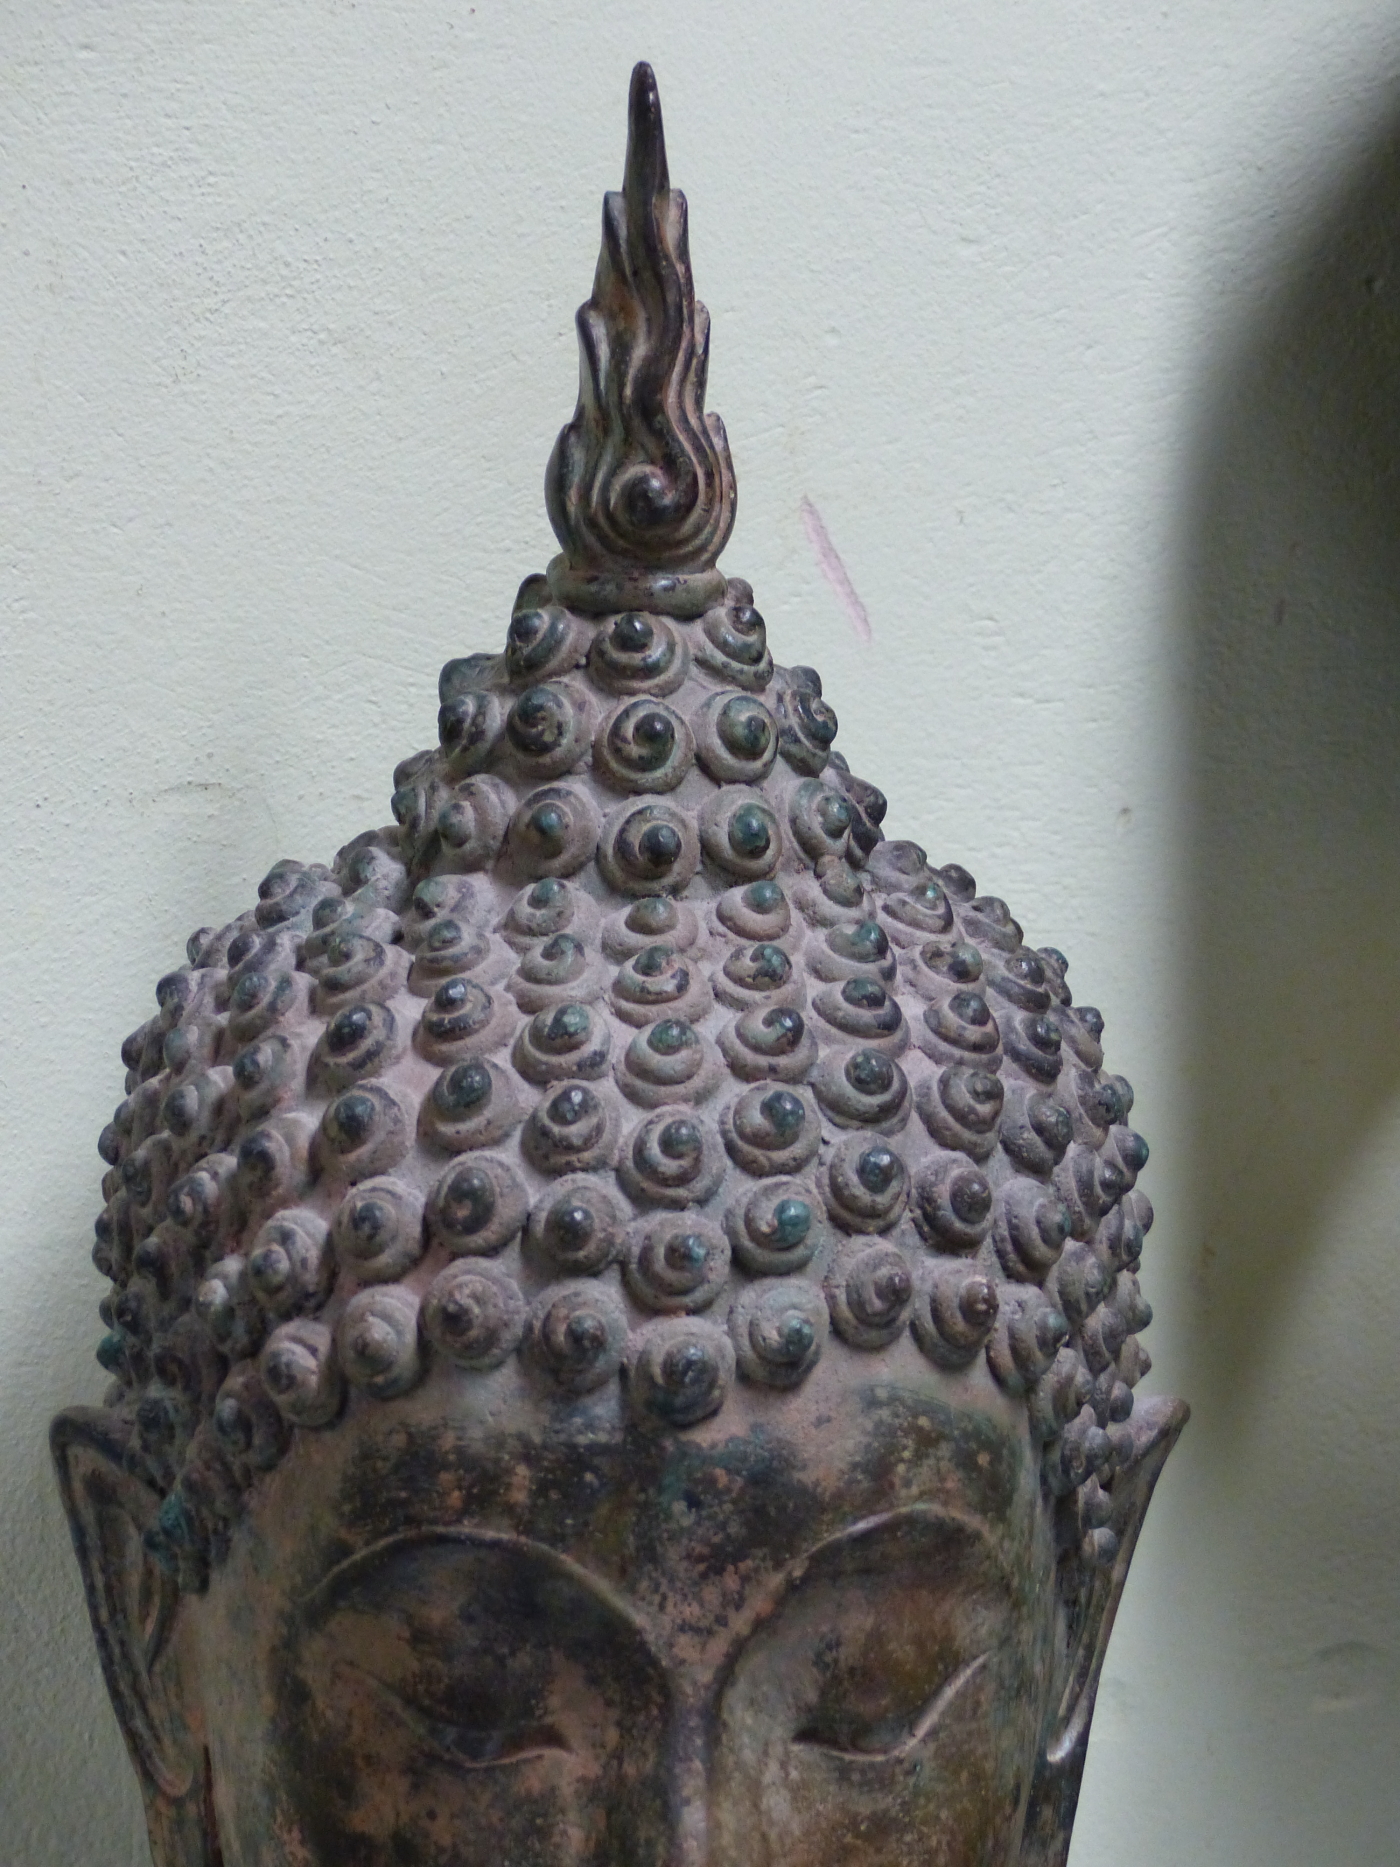 A THAI BRONZE HEAD OF THE BUDDHA, CURLED HAIR ABOVE HIS LONG LOBED EARS, HIS USNISA WITH FLAME - Image 5 of 10